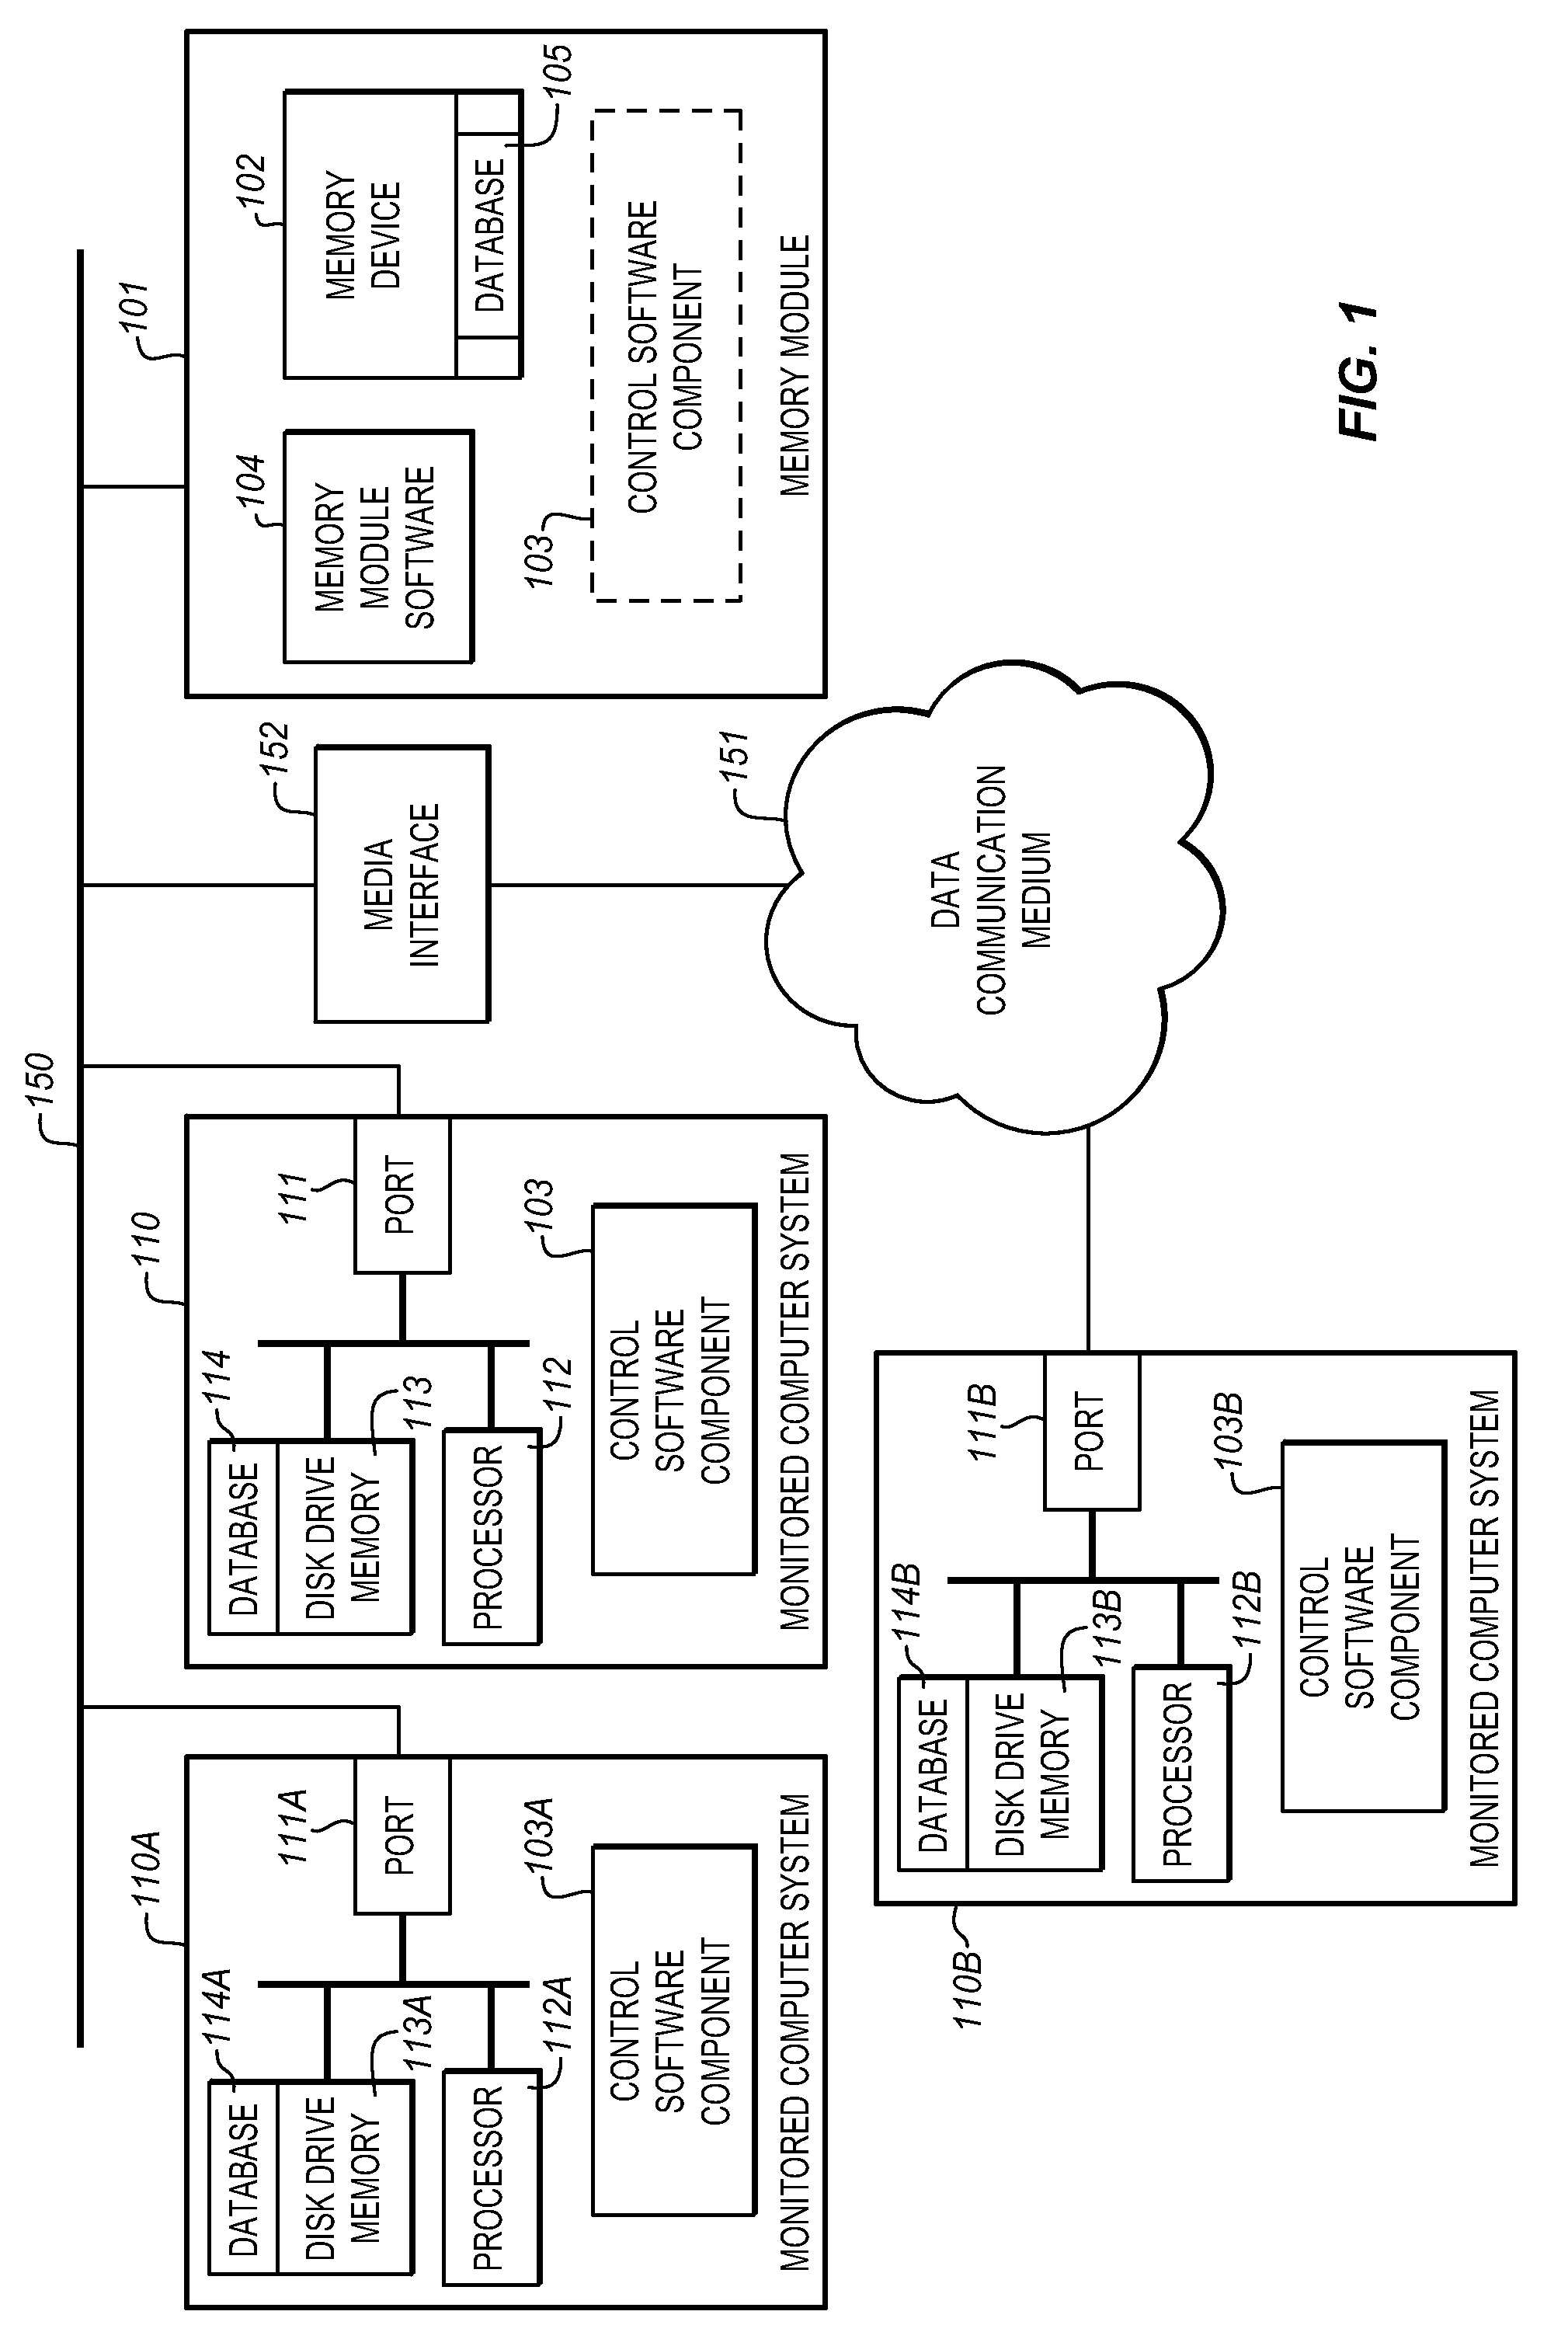 System for automatically shadowing encrypted data and file directory structures for a plurality of network-connected computers using a network-attached memory with single instance storage